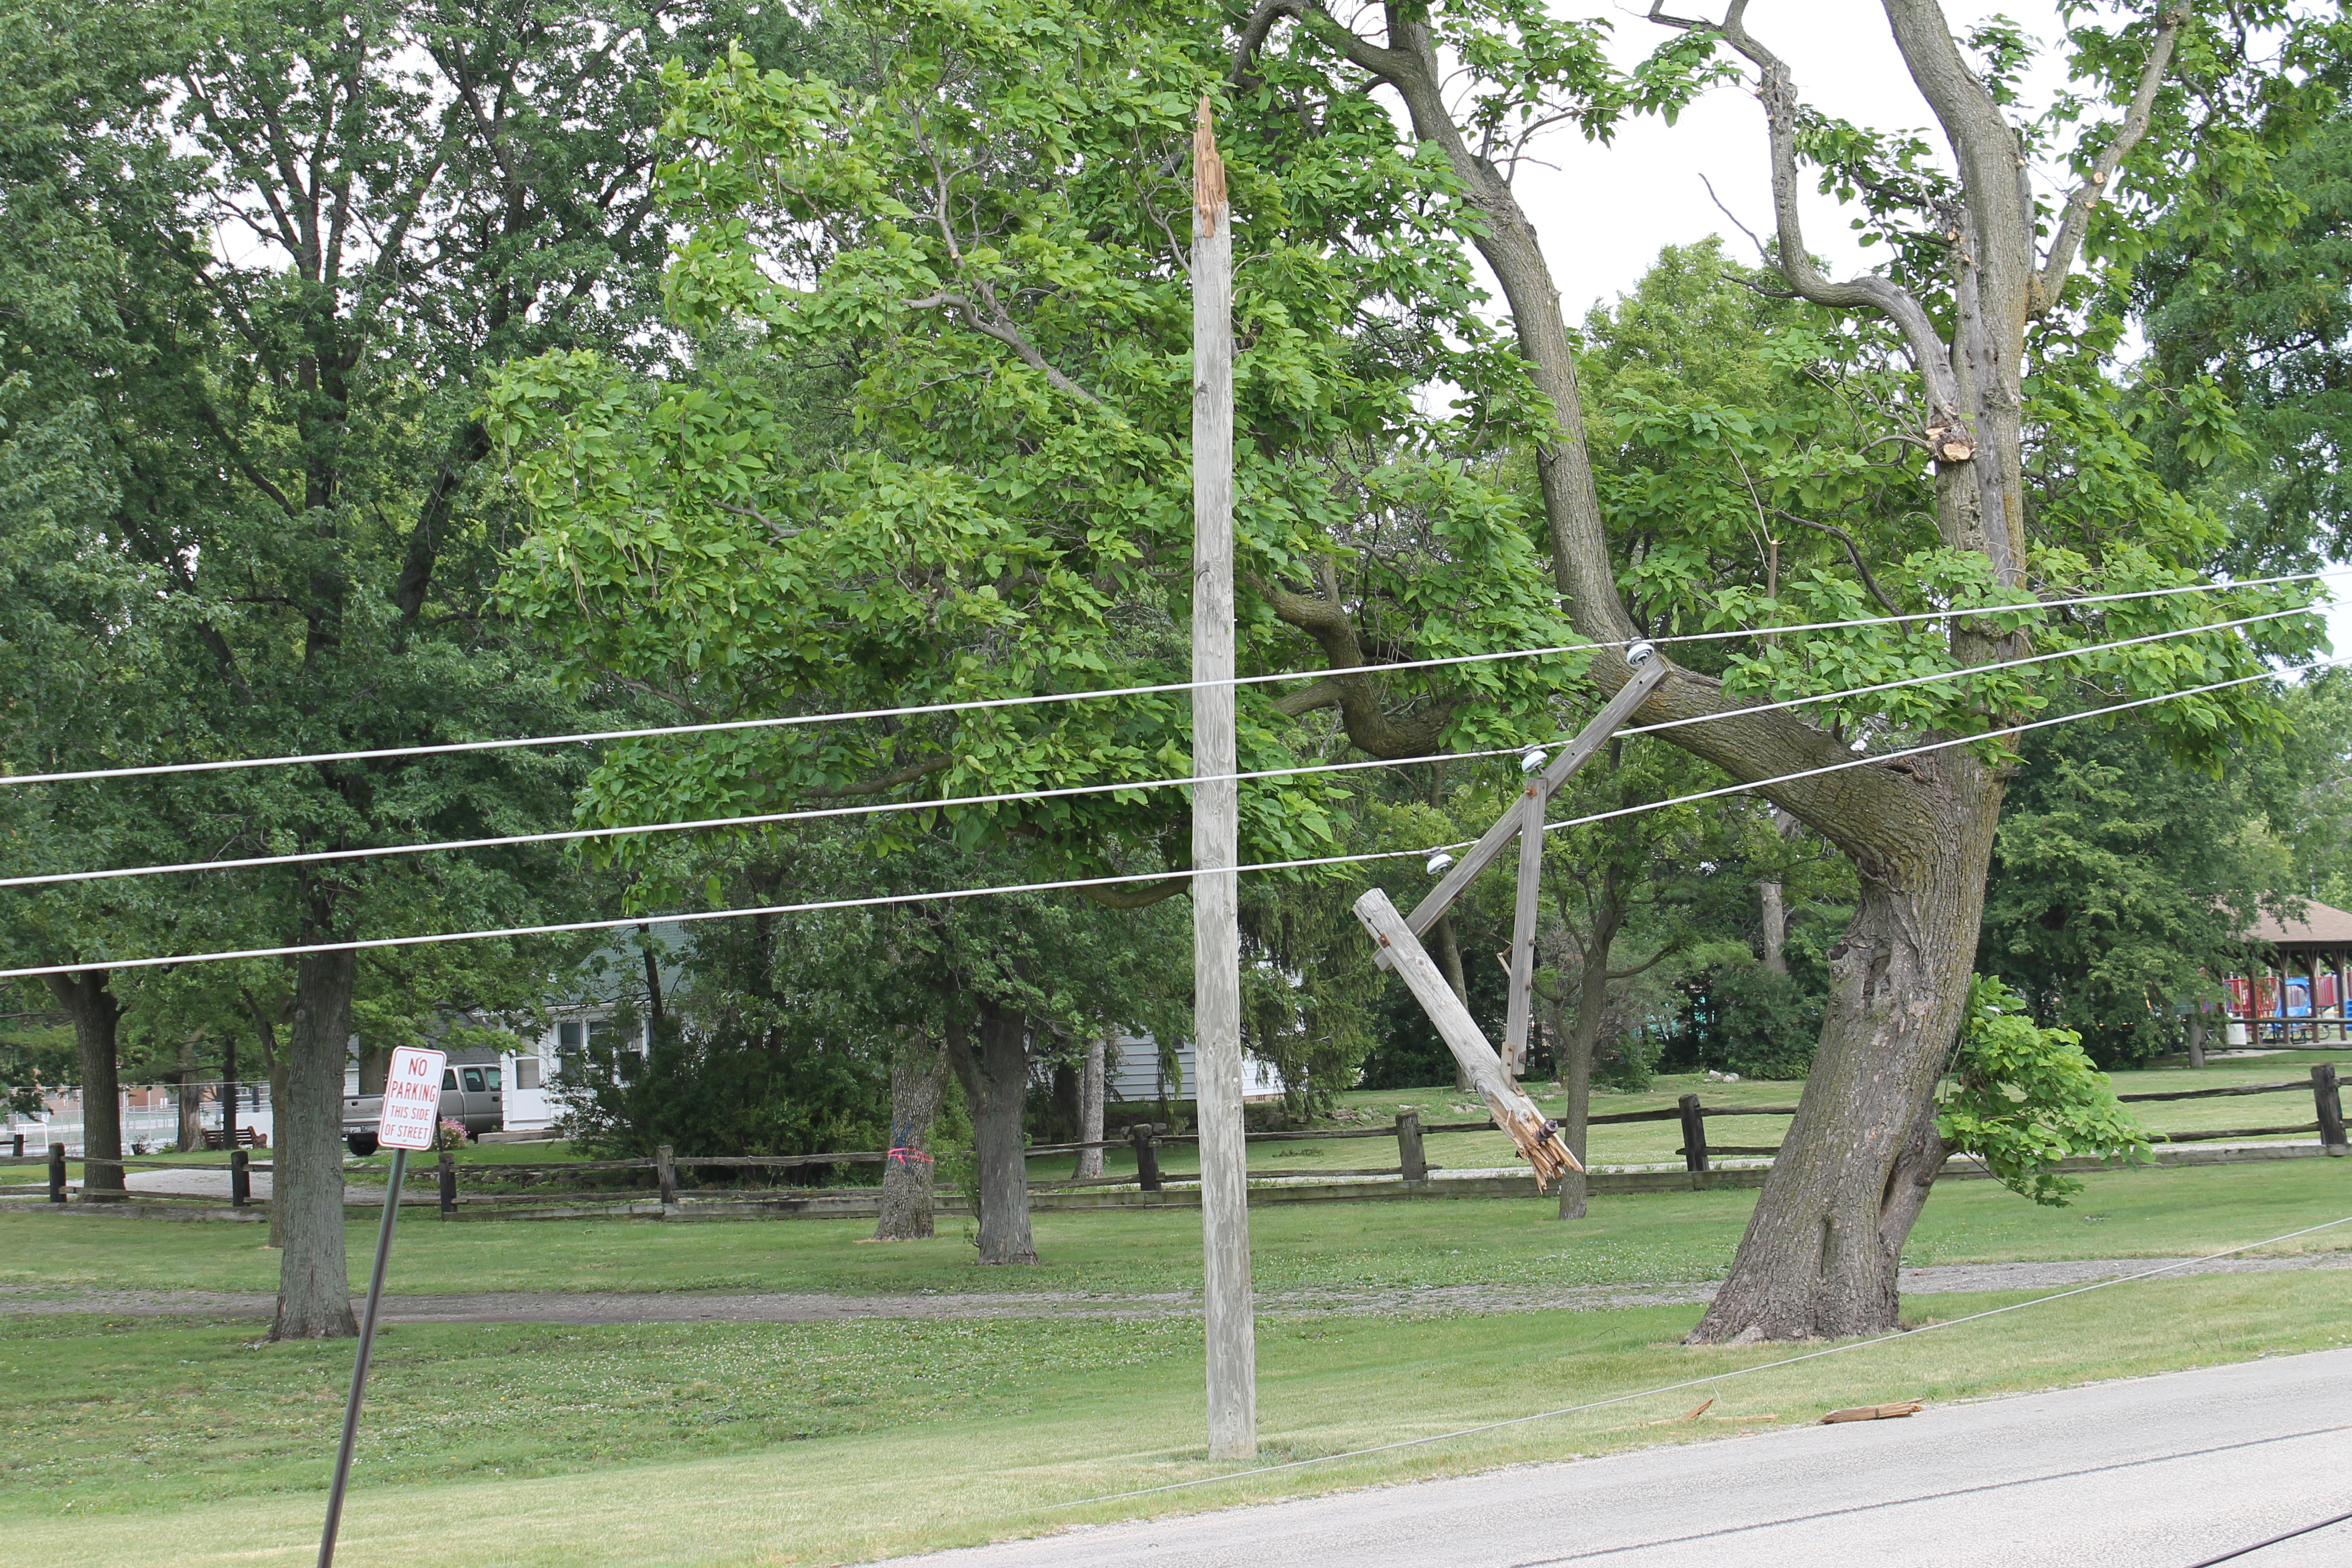 Power lines down at Will county Fair Grounds on West street in Peotone.  Photo by Dave Sommerfeld